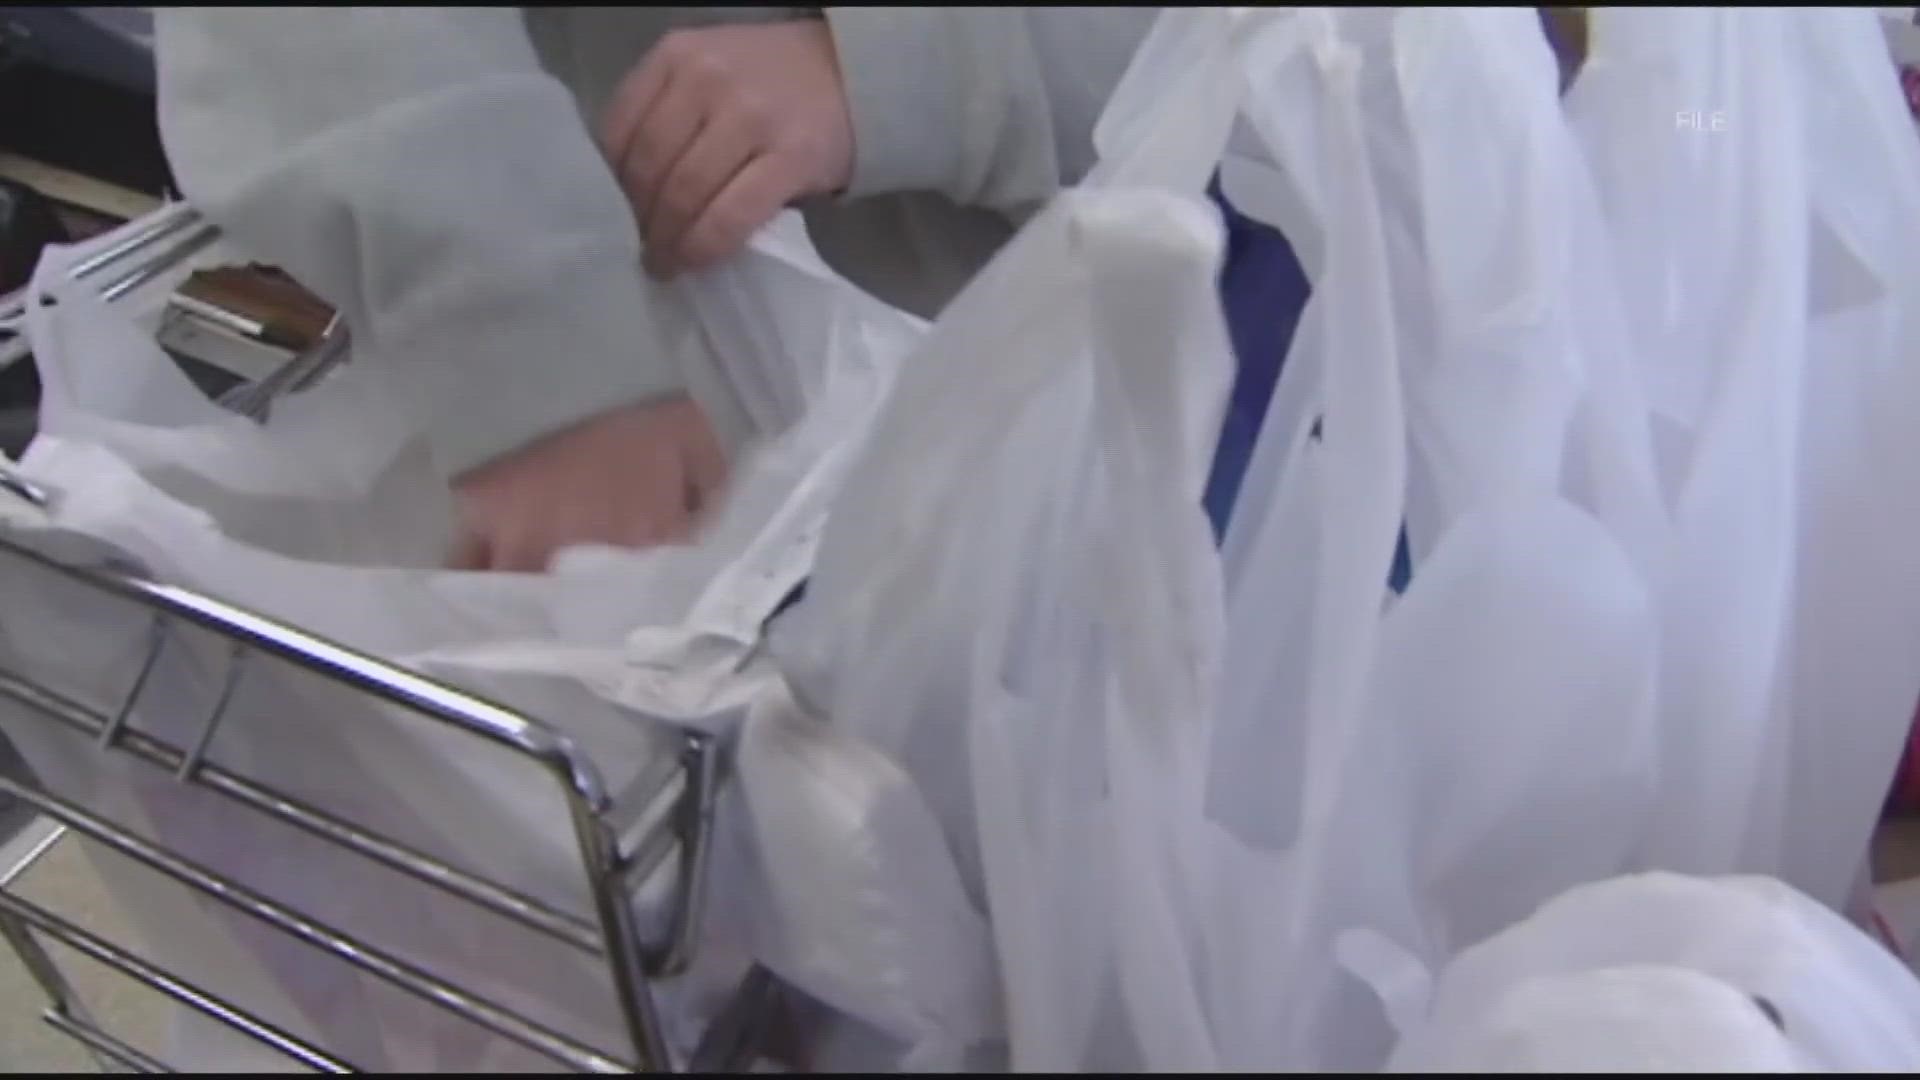 LD 425 was proposed to the Legislature on Wednesday and would reverse the plastic bag ban put in place a year and a half ago.